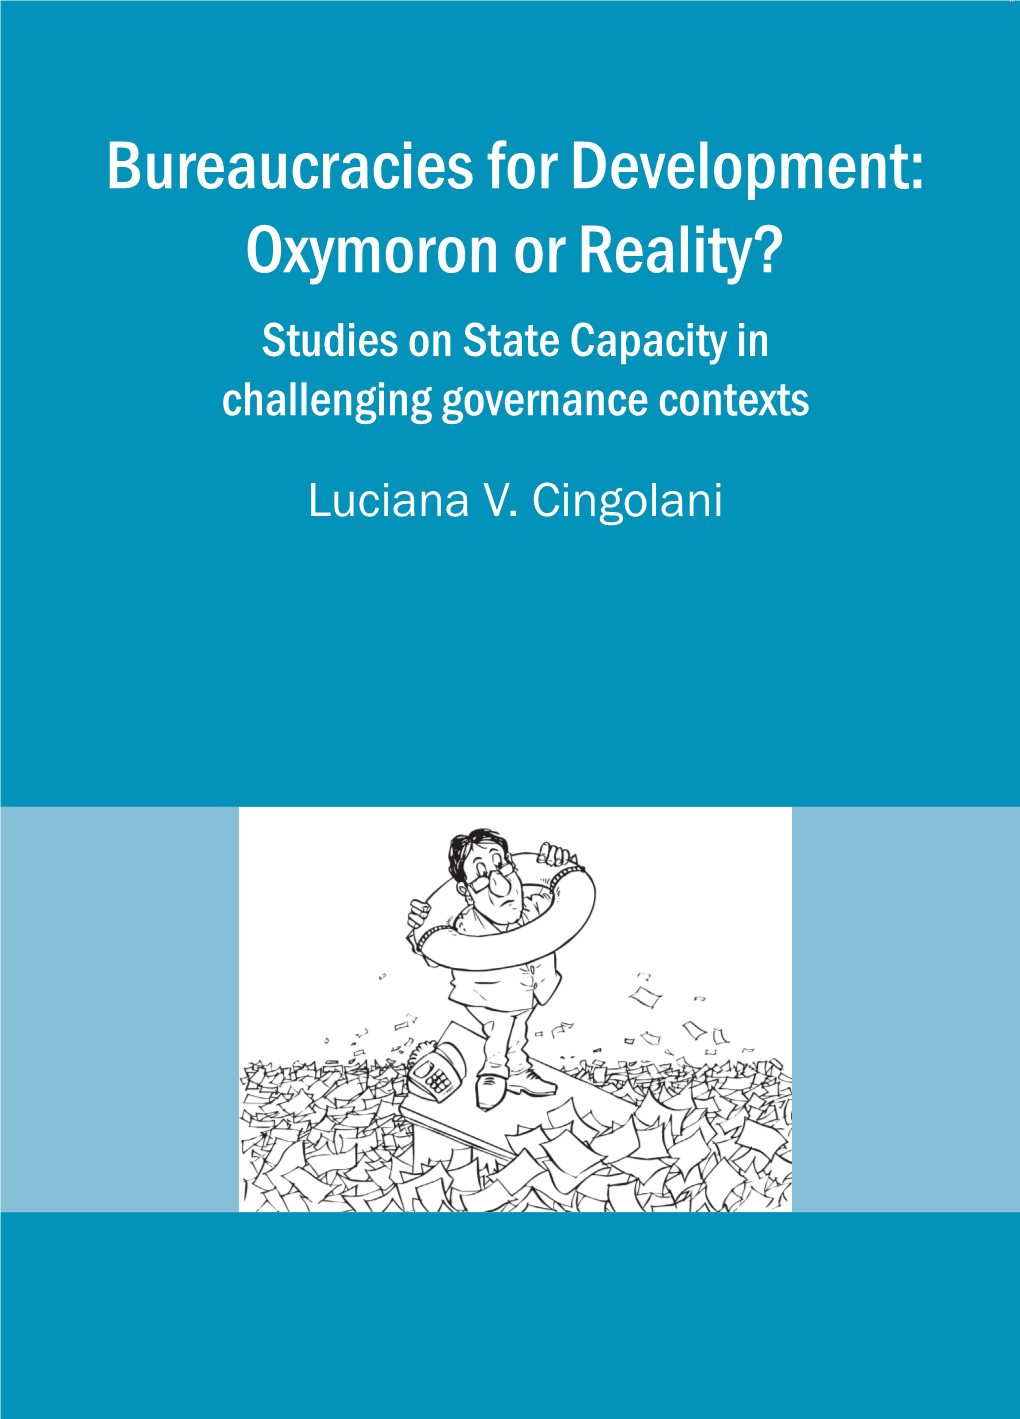 Bureaucracies for Development: Oxymoron Or Reality? Studies on State Capacity in Challenging Governance Contexts